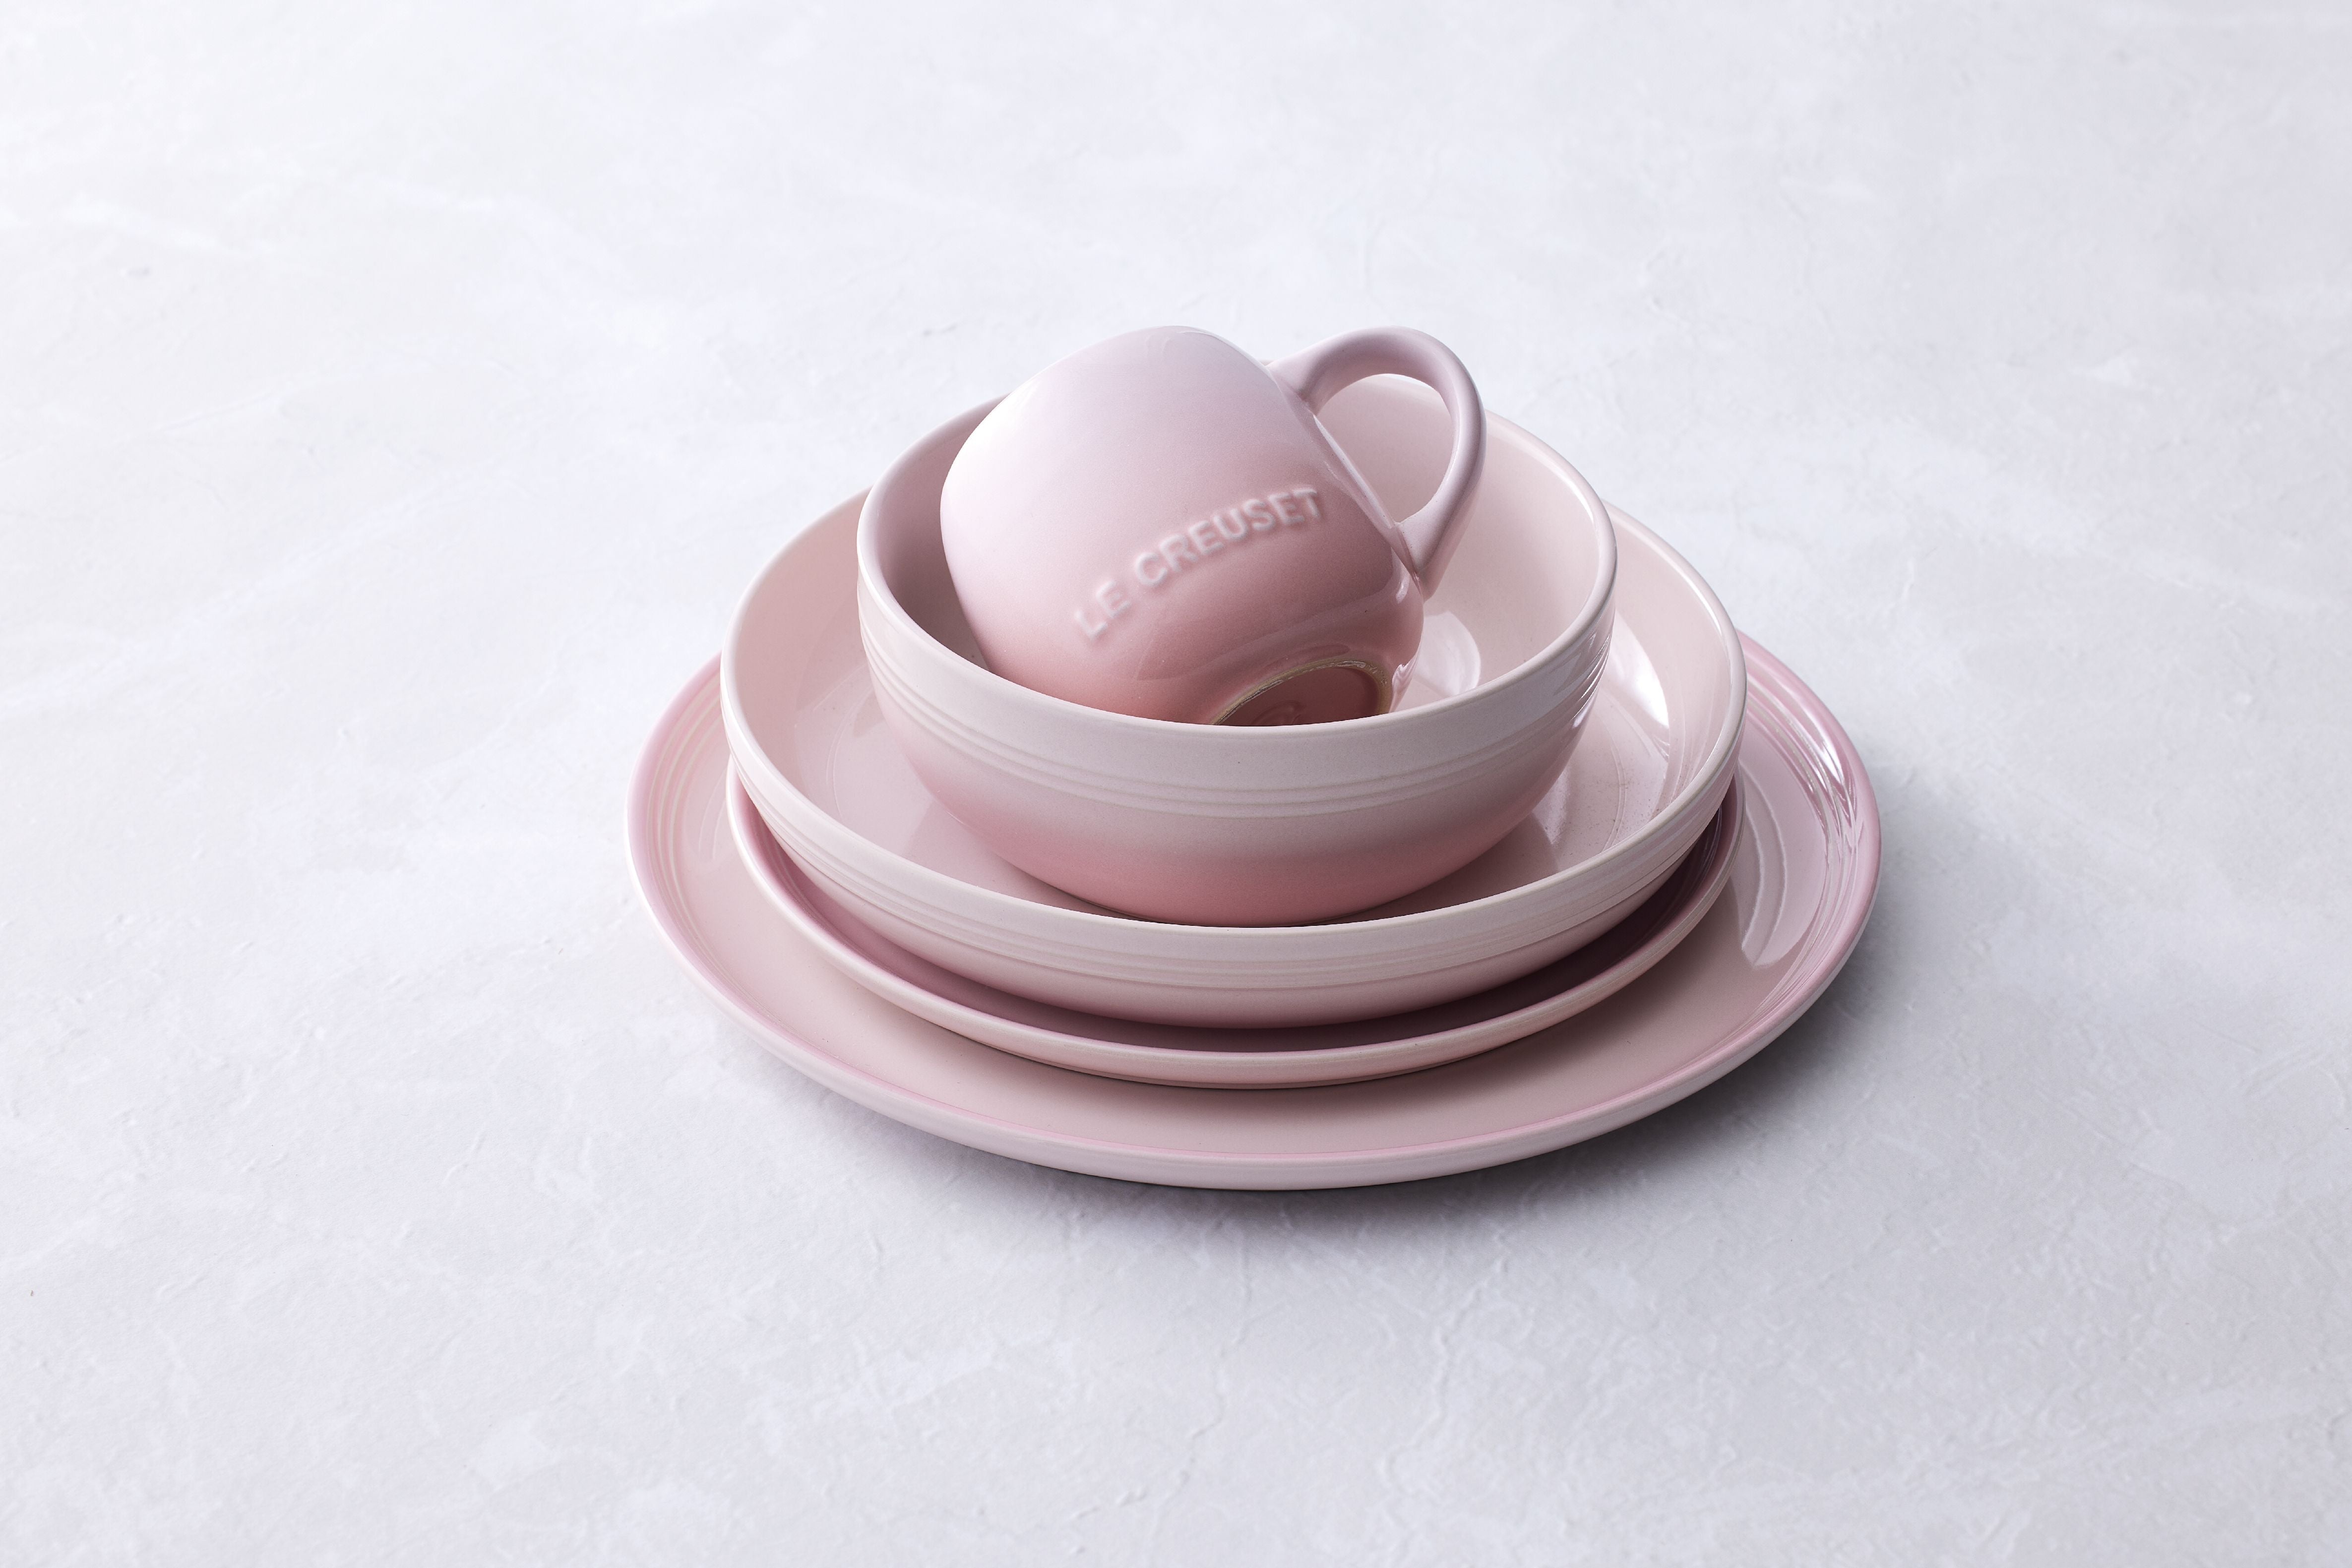 Le creuset coupe middagsplade, shell pink